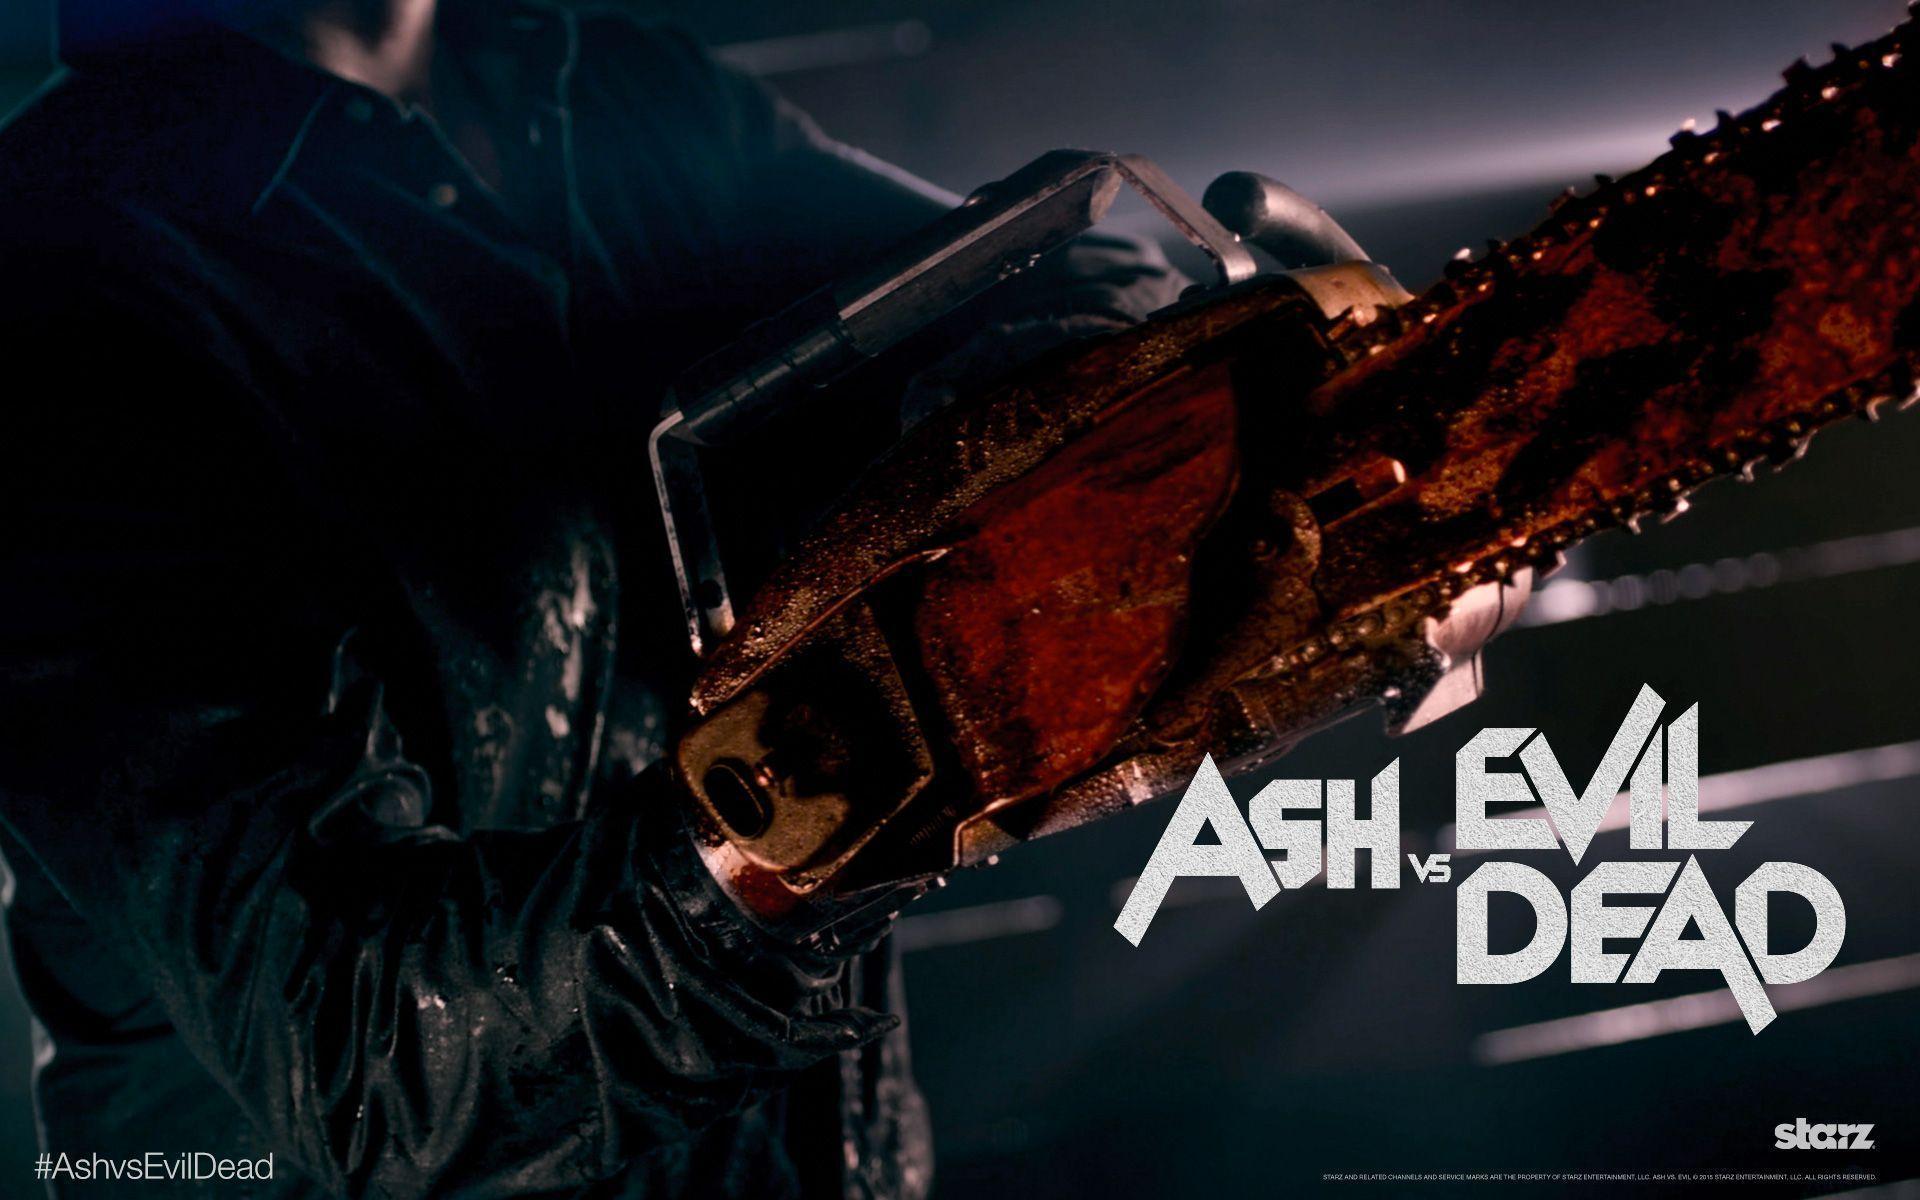 Ash vs Evil Dead" on Home Video This Summer